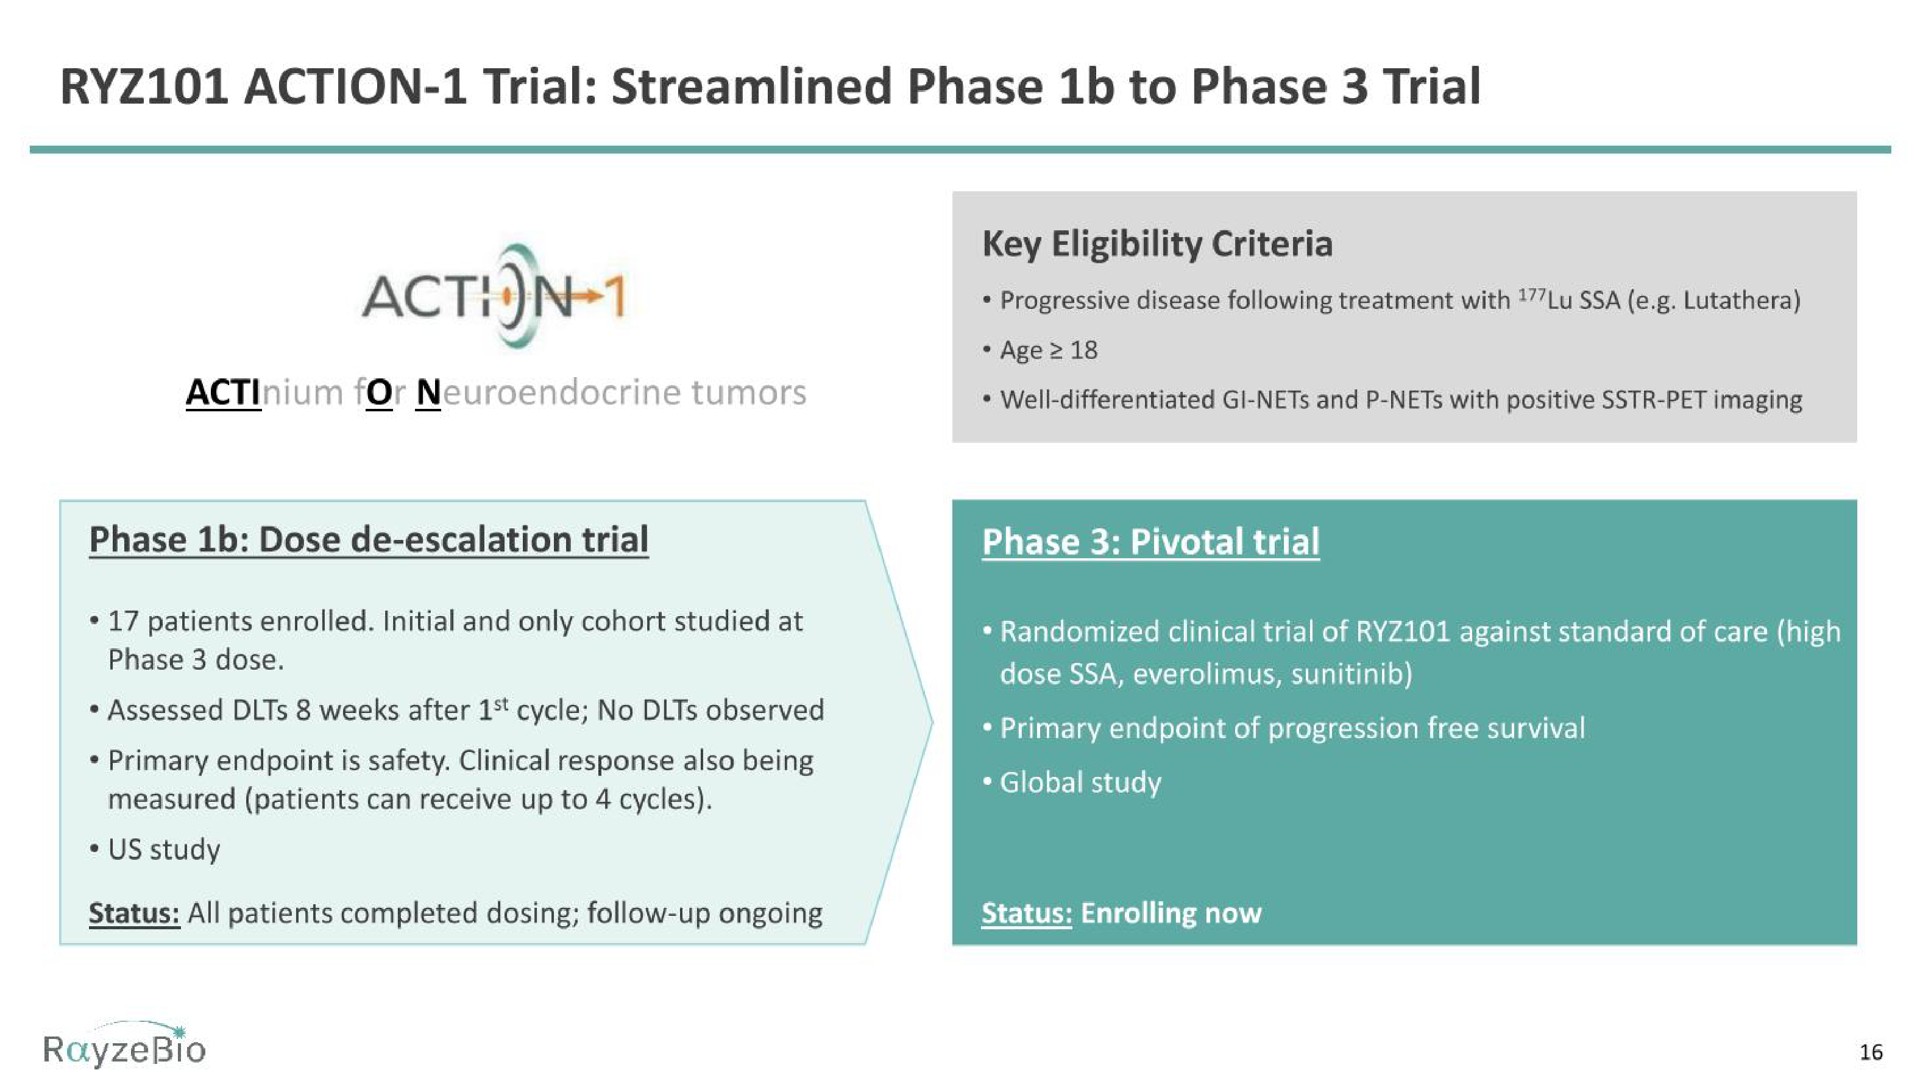 action trial streamlined phase to phase trial | RayzeBio